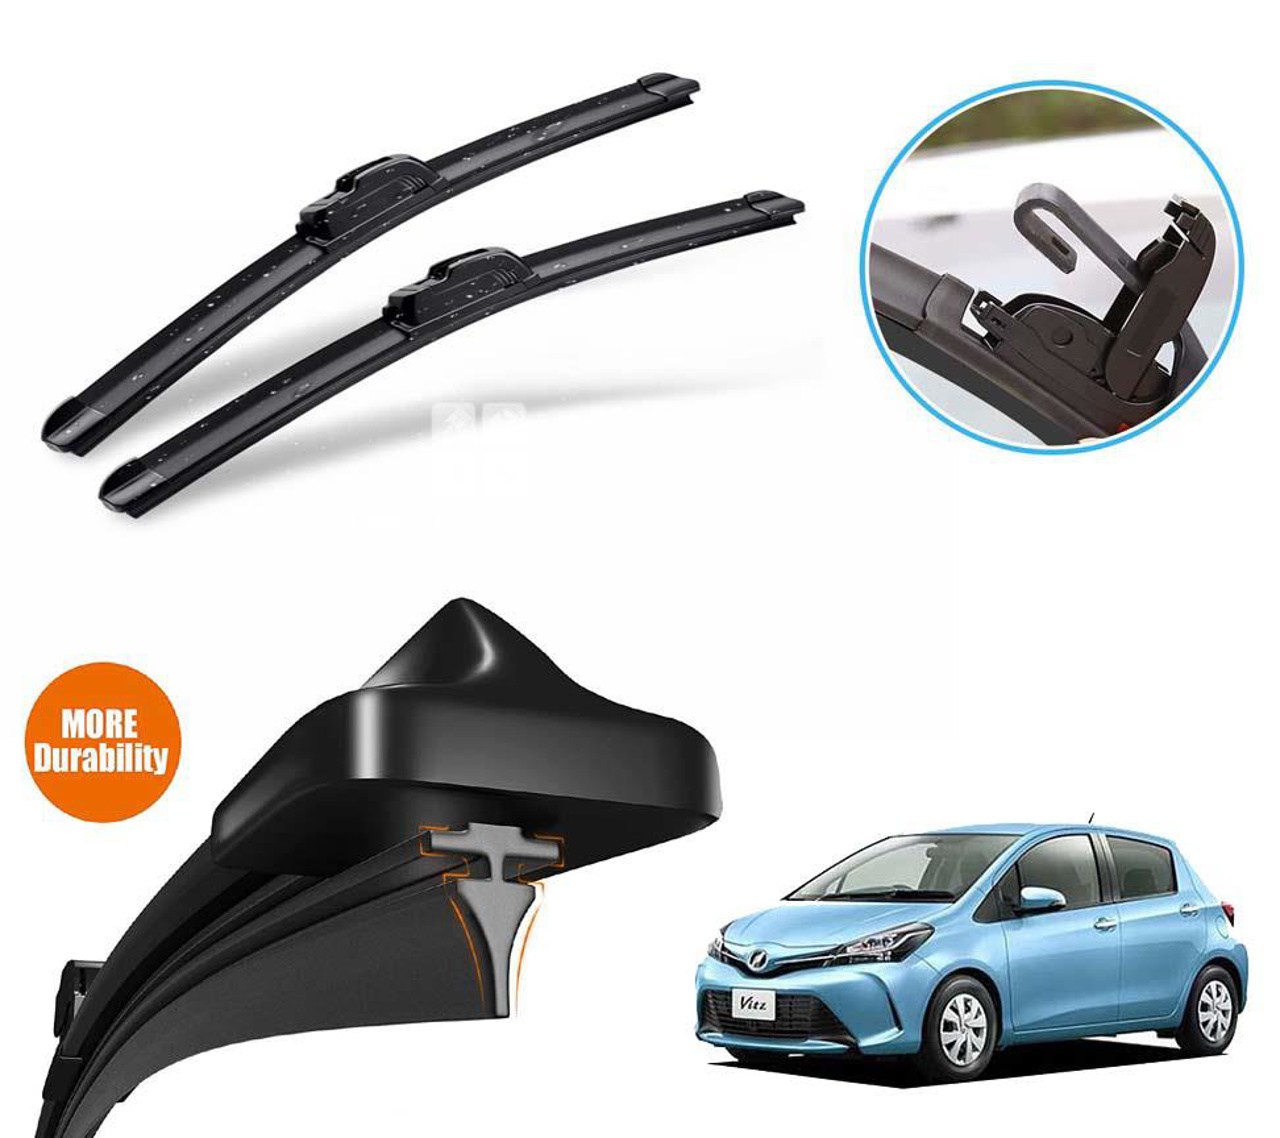 Picture of Toyota Vitz 1998 - 2010 Silicone Wiper Blades | Soft Rubber Vipers | High Quality Graphite Coated Rubber | Non Cracking Material